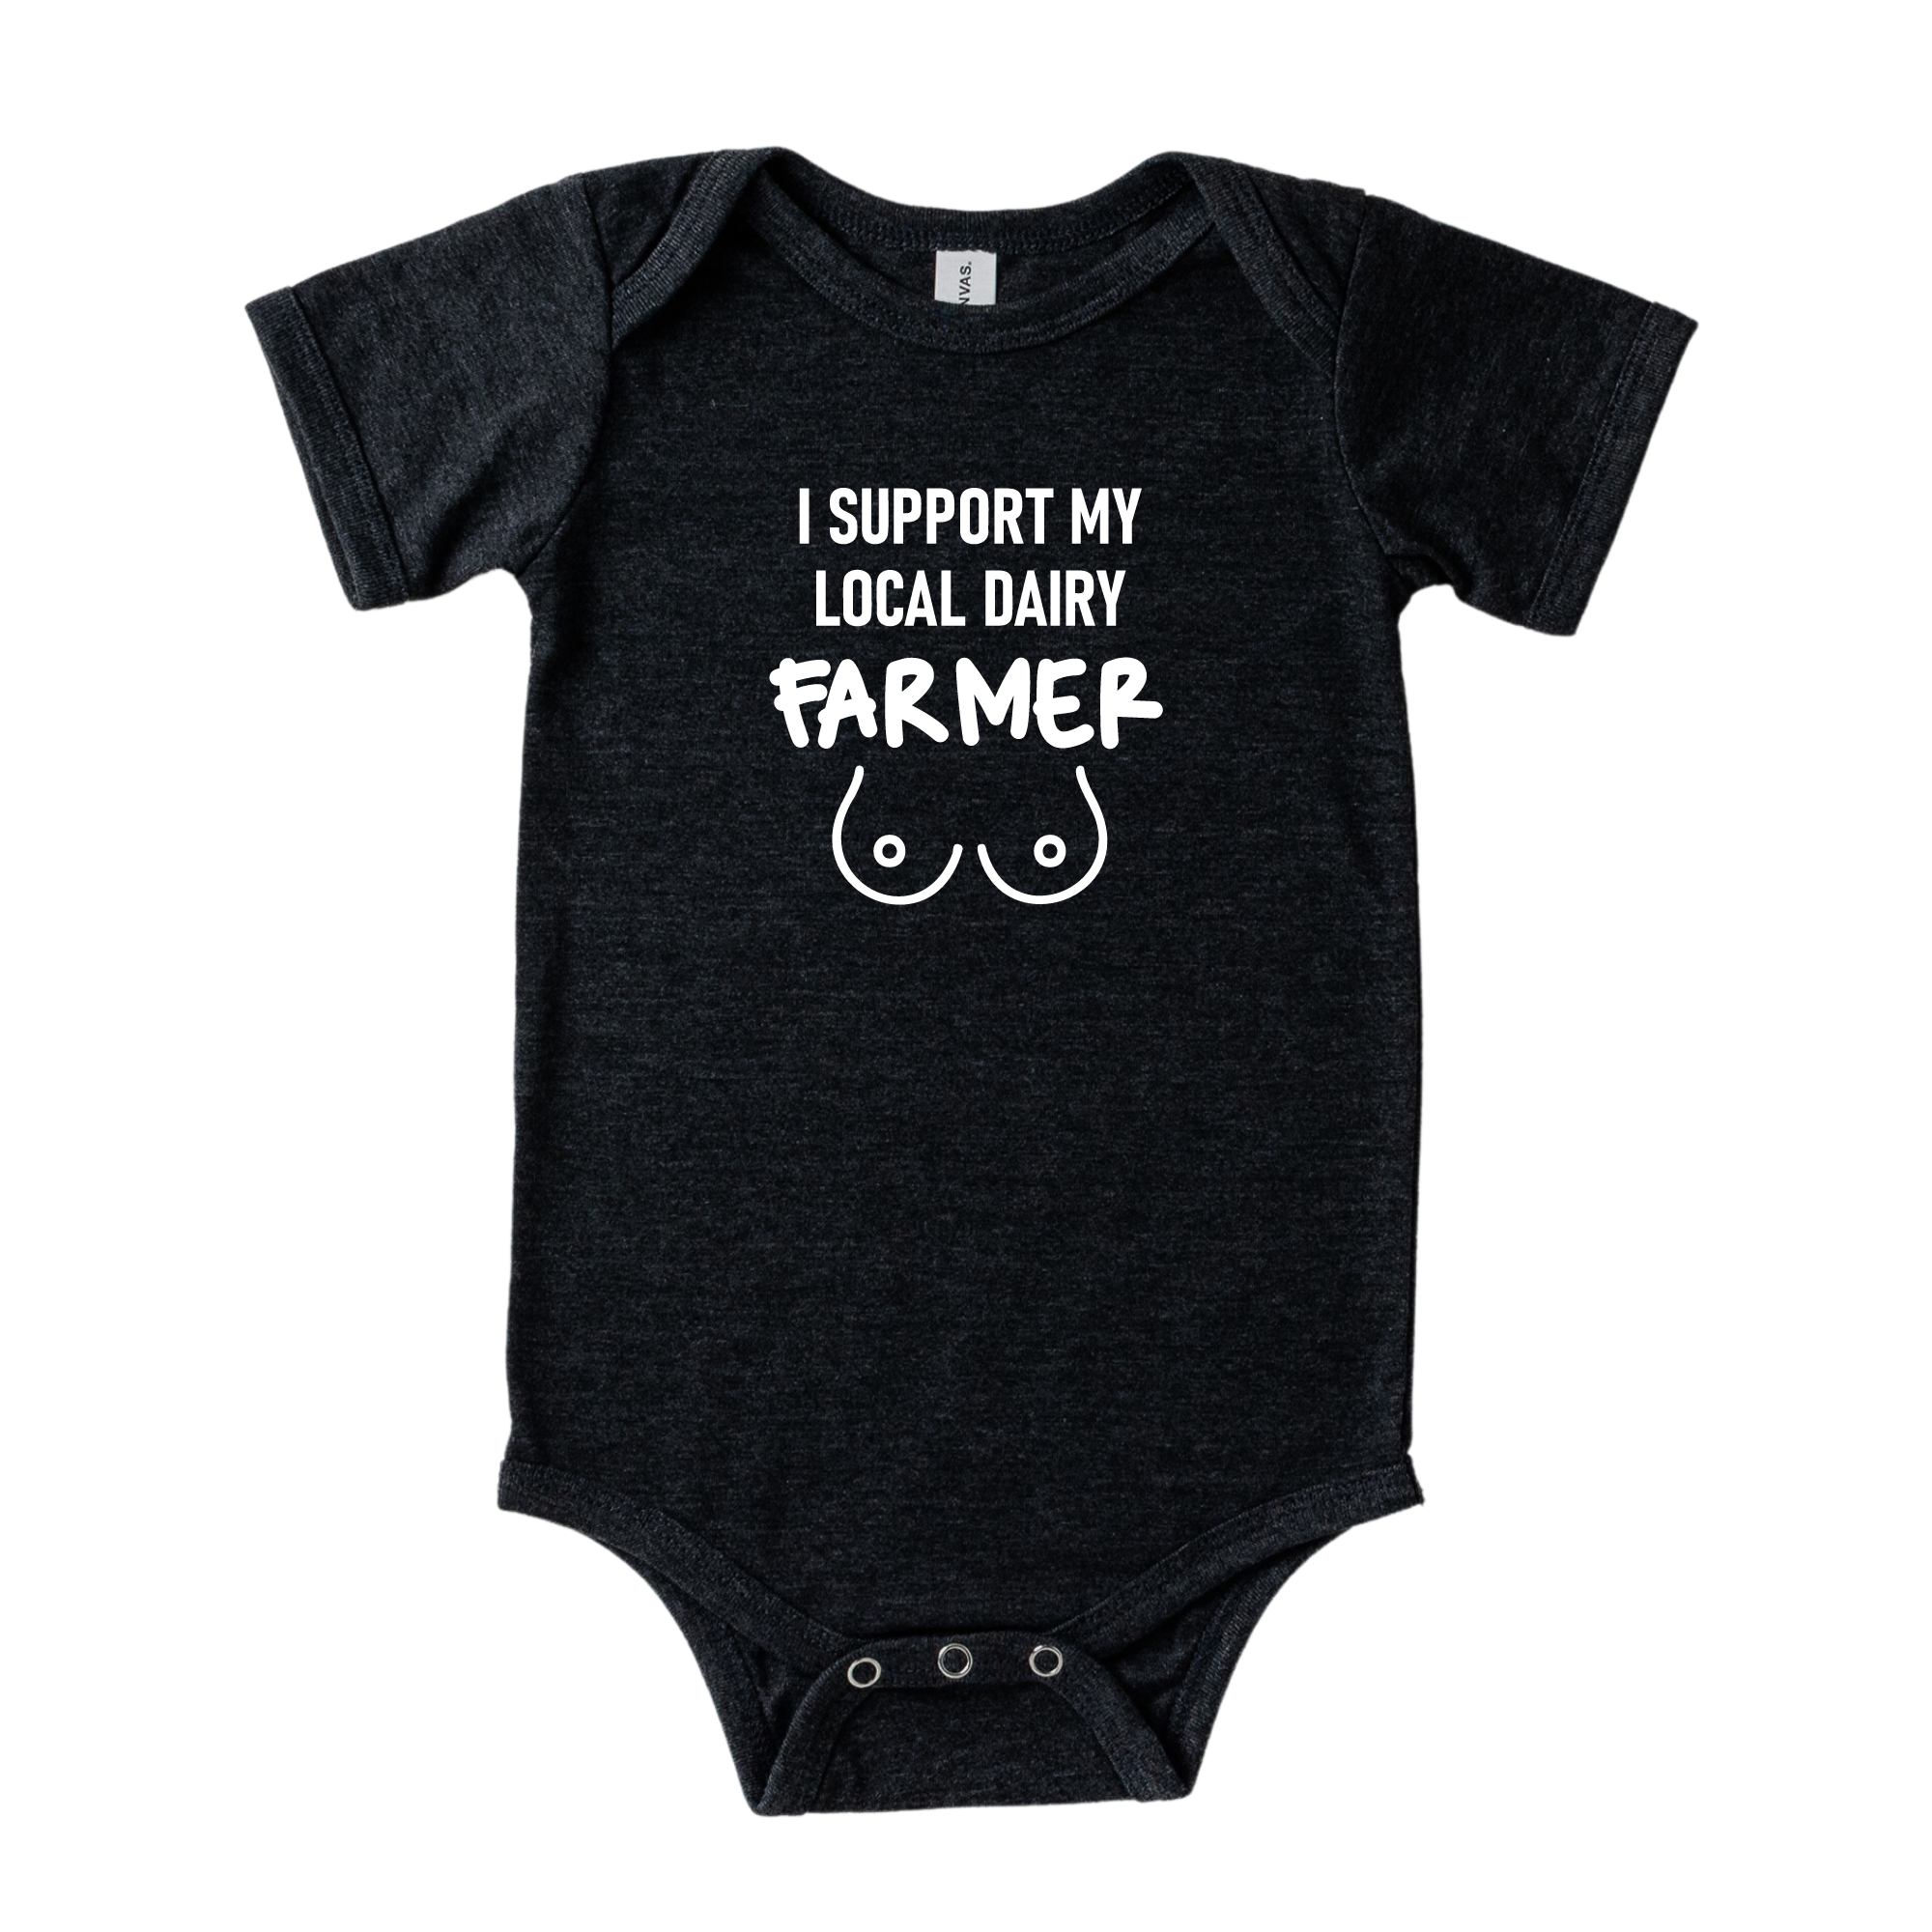 Support Local Dairy Farmer Boob Baby Bodysuit or Tshirt *UNISEX FIT*-Baby & Toddler-208 Tees Wholesale, Idaho